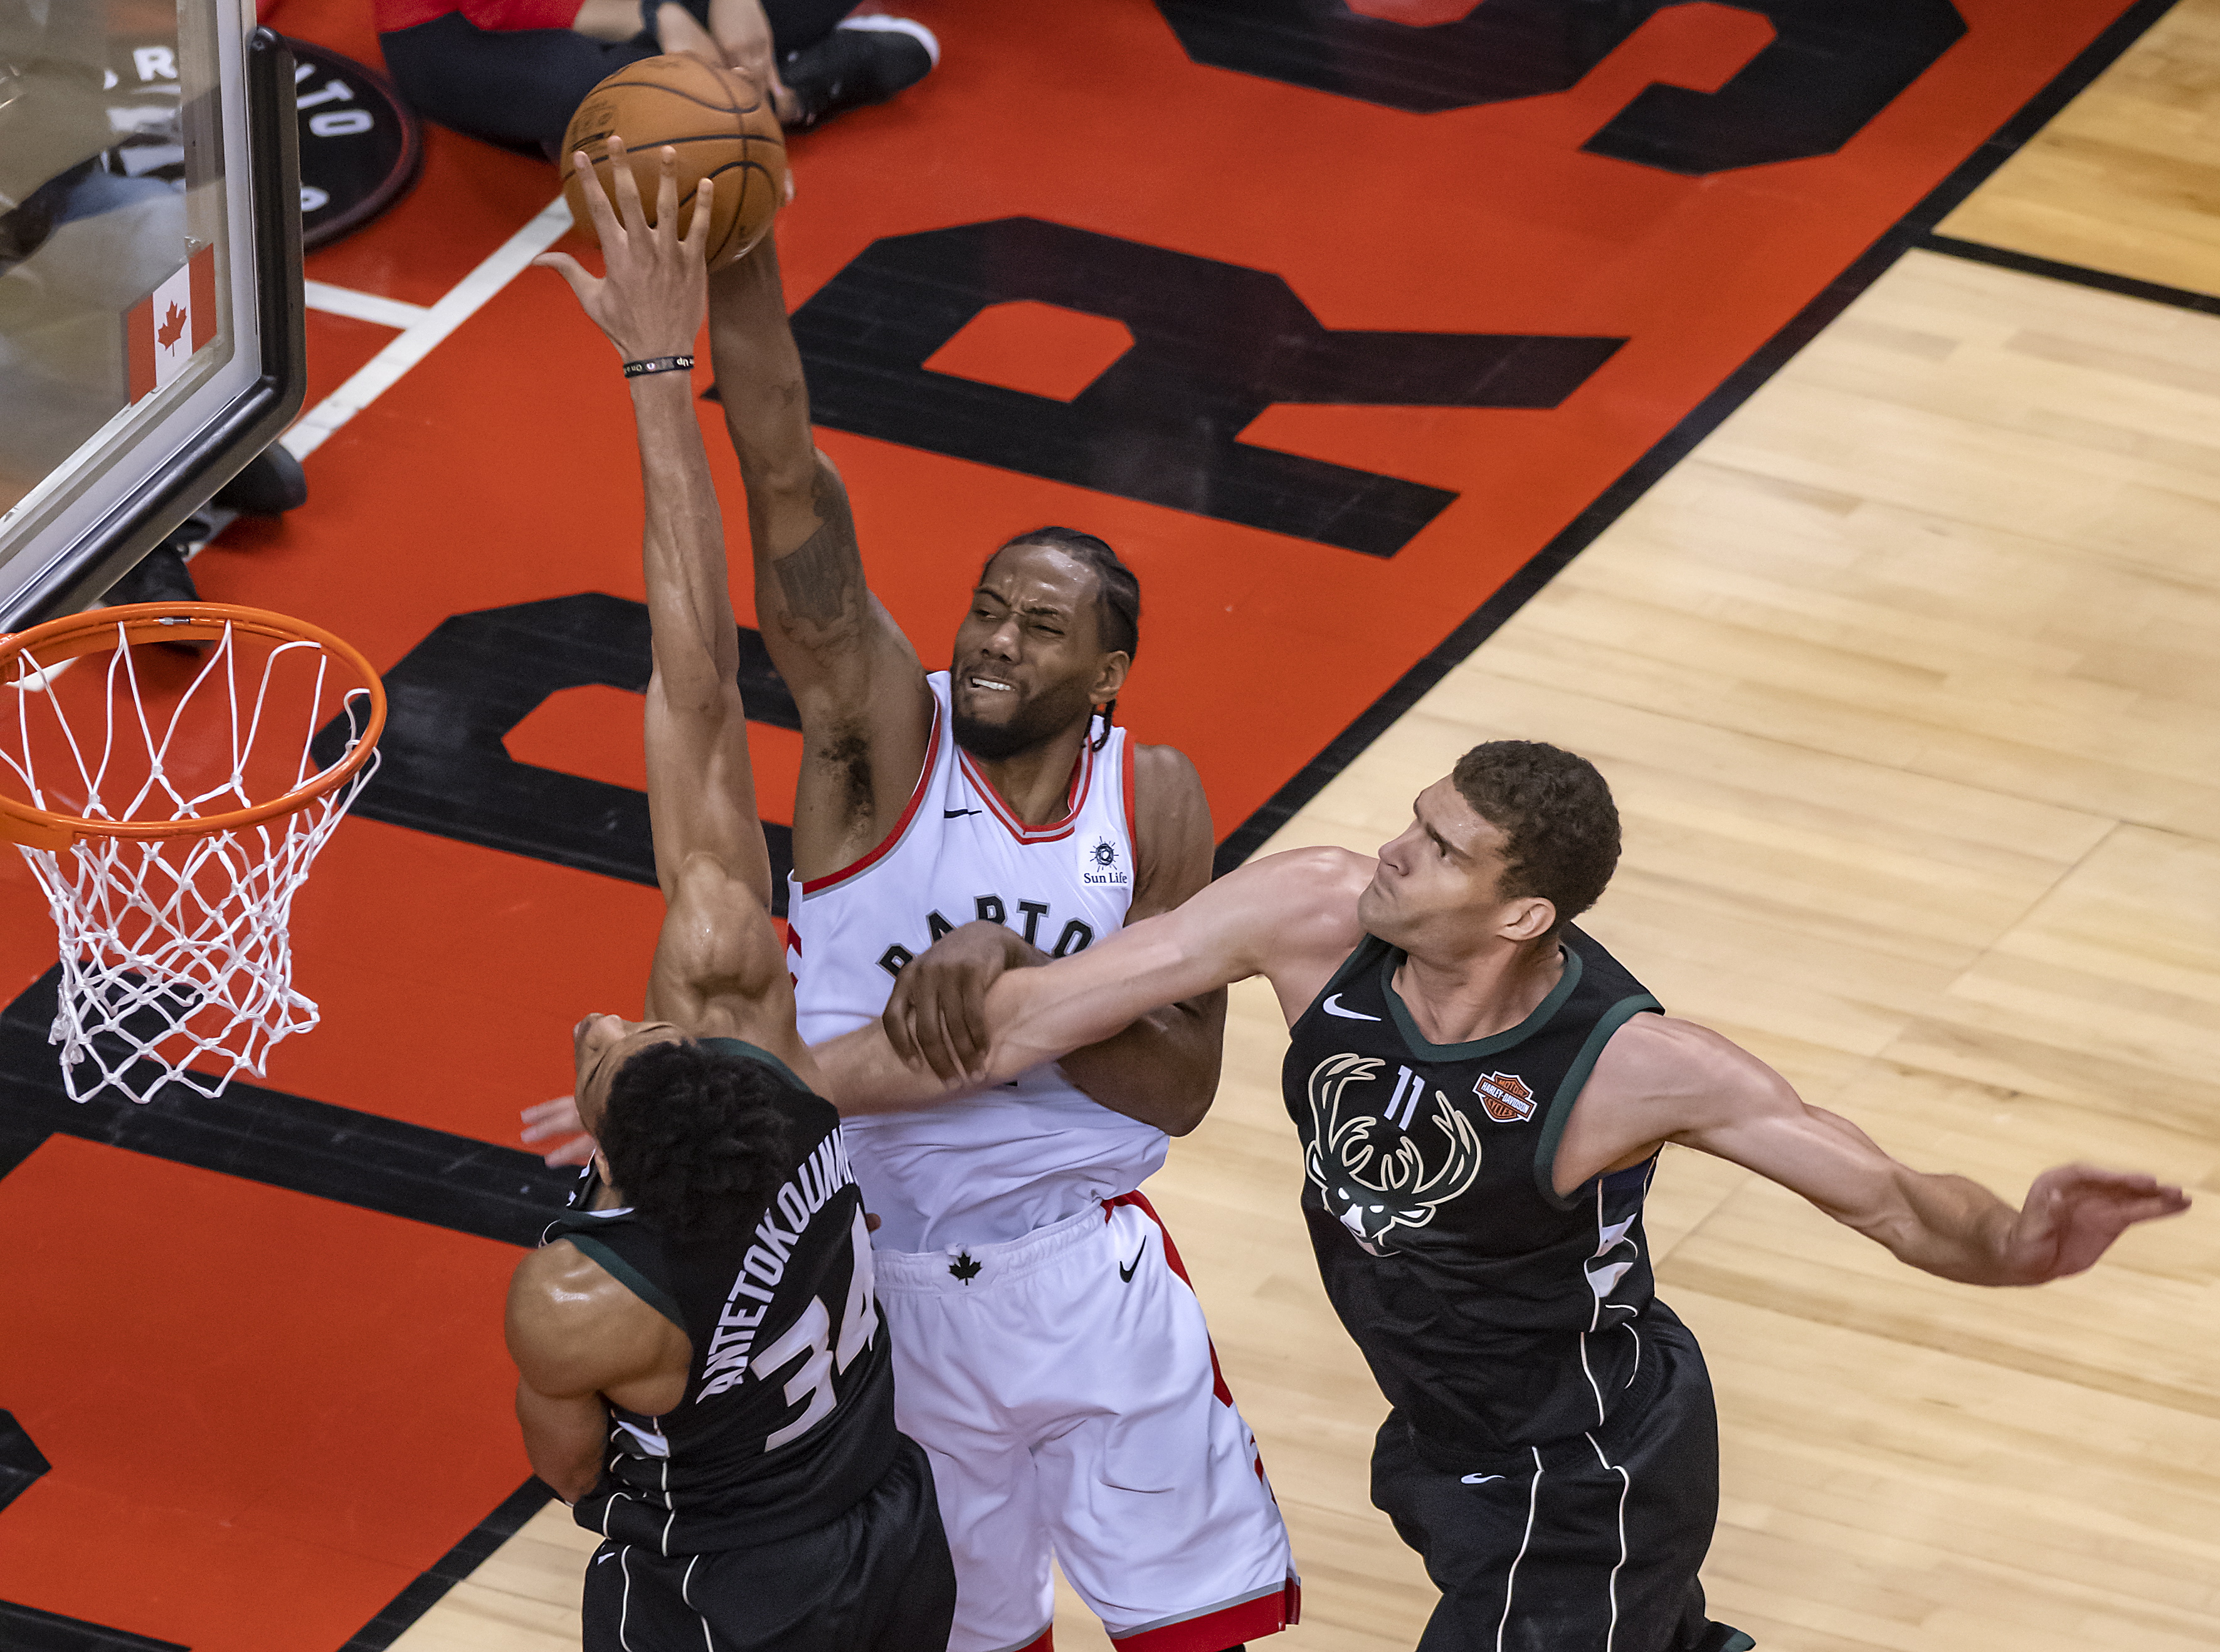 epa07601185 Toronto Raptors forward Kawhi Leonard (C) goes up to the basket between Milwaukee Bucks forward Giannis Antetokounmpo of Greece (L) and center Brook Lopez (R) in the fourth quarter of the NBA Eastern Conference Finals basketball game six between the Toronto Raptors and Milwaukee Bucks at Scotiabank Arena in Toronto, Canada, 25 May 2019.  EPA/WARREN TODA  SHUTTERSTOCK OUT